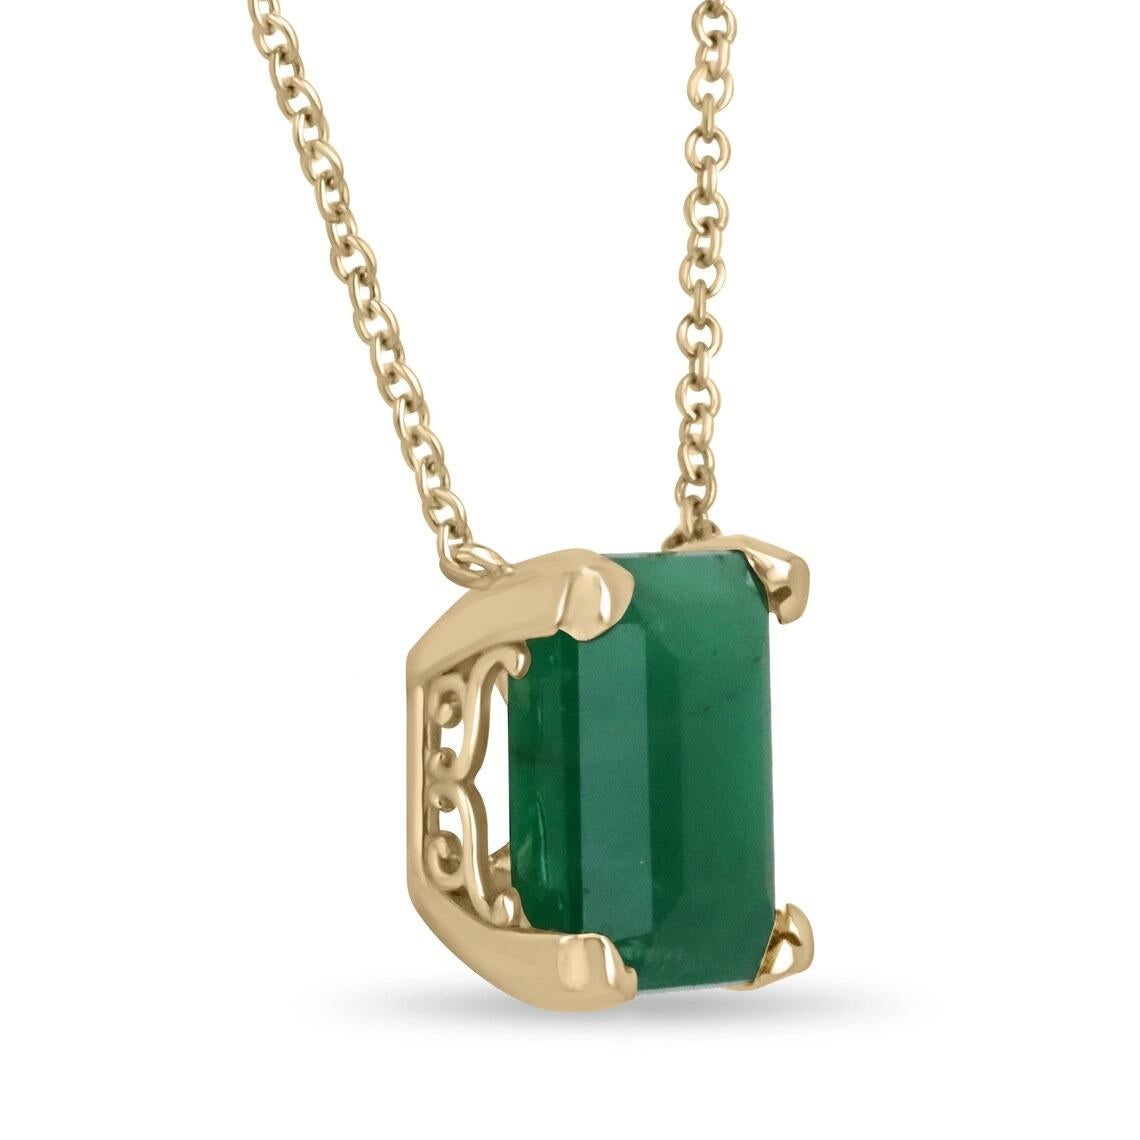 Featured here is a very rare and large 10.50-carat stunning, deep green emerald necklace in fine 14K yellow gold. Displayed in the center is a deep green emerald accented by a simple four-prong gold mount, allowing for the emerald to be shown in